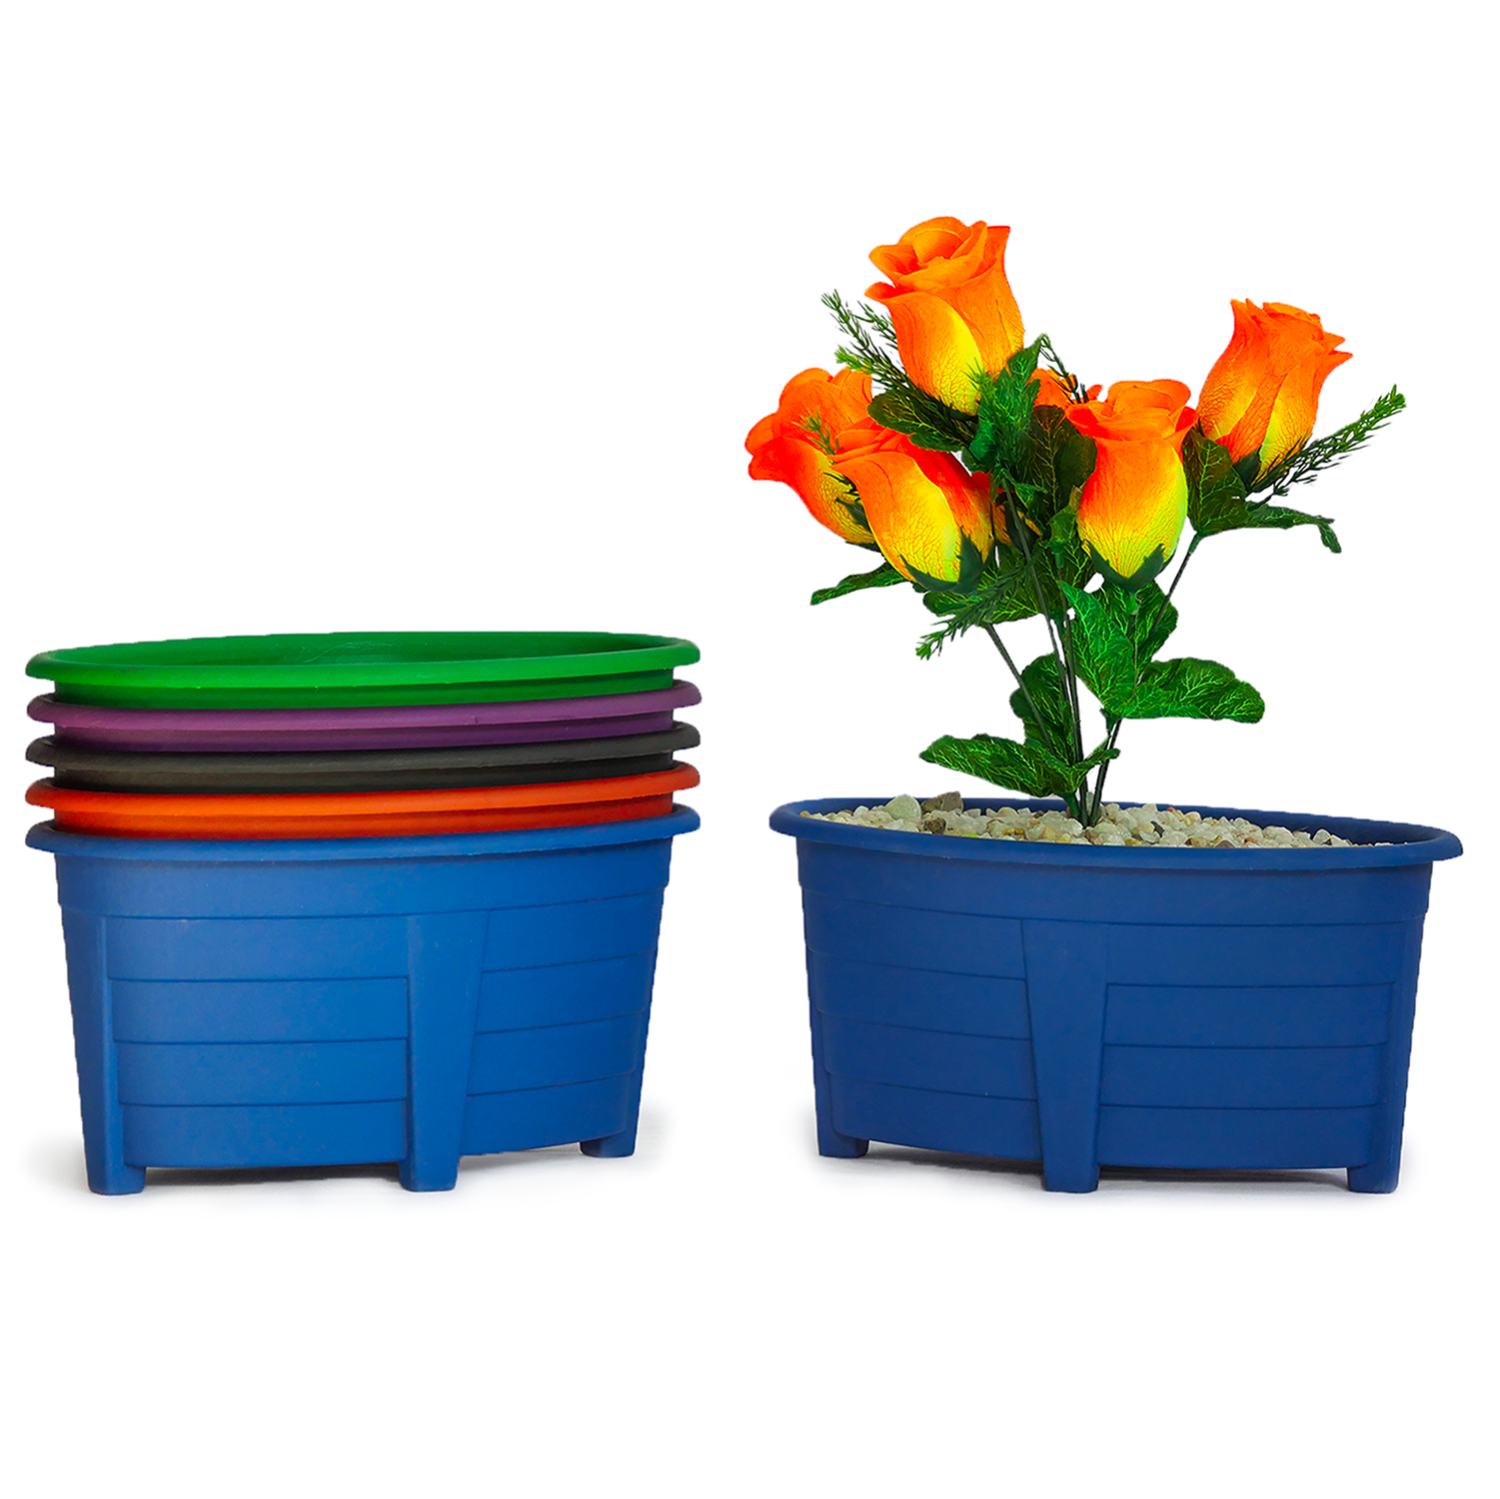 Platora - Medium Size Oval Planter Pots(Set of 5, 11"Inch, Multi-Colour) Weather/UV Resistant and Long-Lasting Planter Pots For Indoor, Outdoor and Living Room. Unique OVAL Design, Portable.